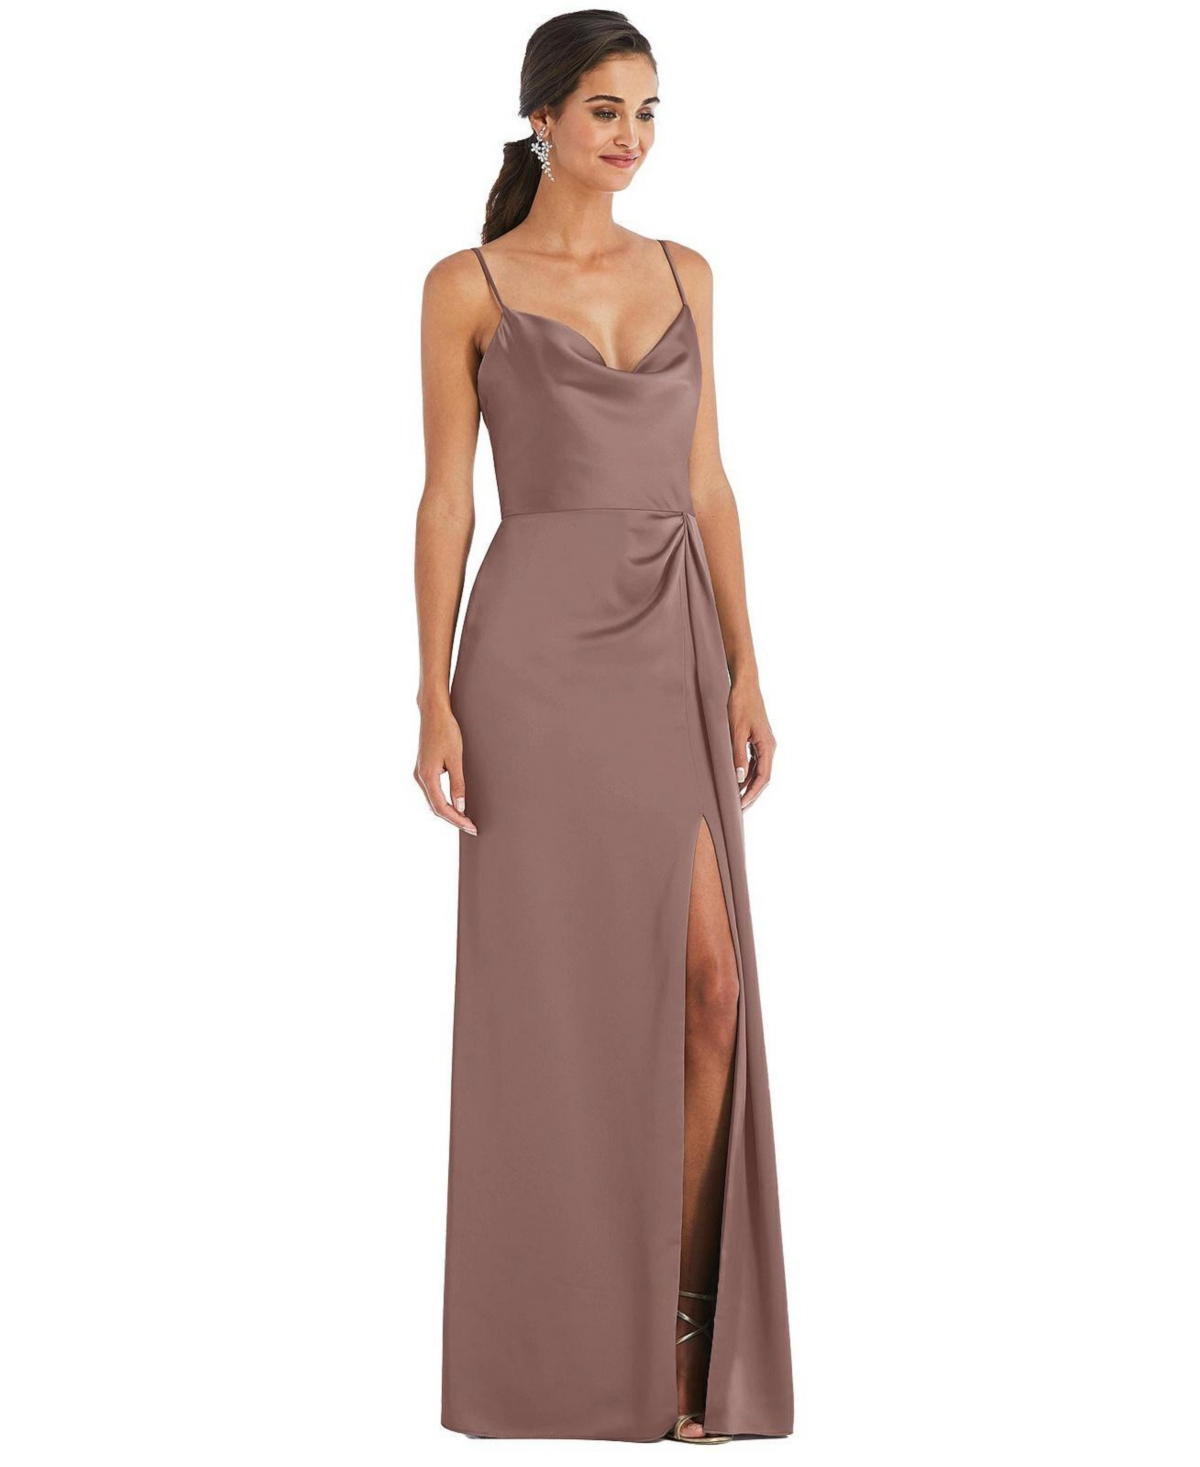 DESSY COLLECTION WOMEN'S COWL-NECK DRAPED WRAP MAXI DRESS WITH FRONT SLIT